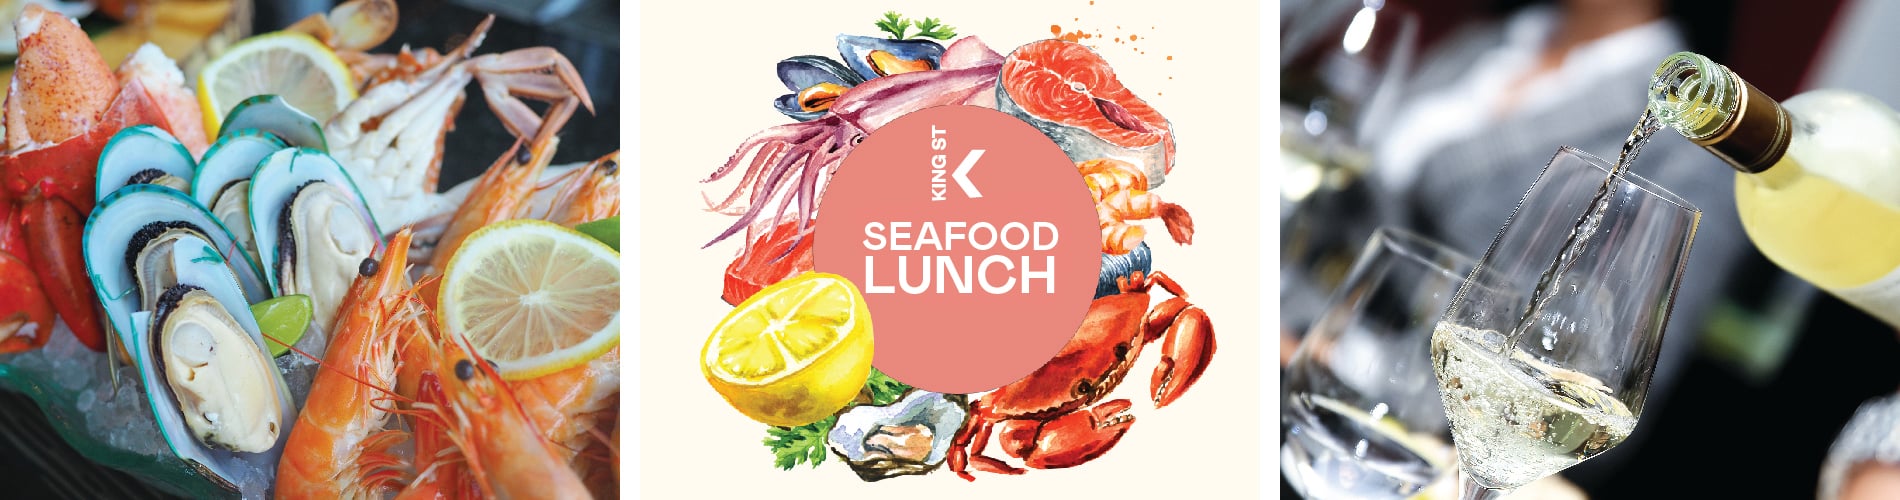 Seafood Lunch Banner01.jpg